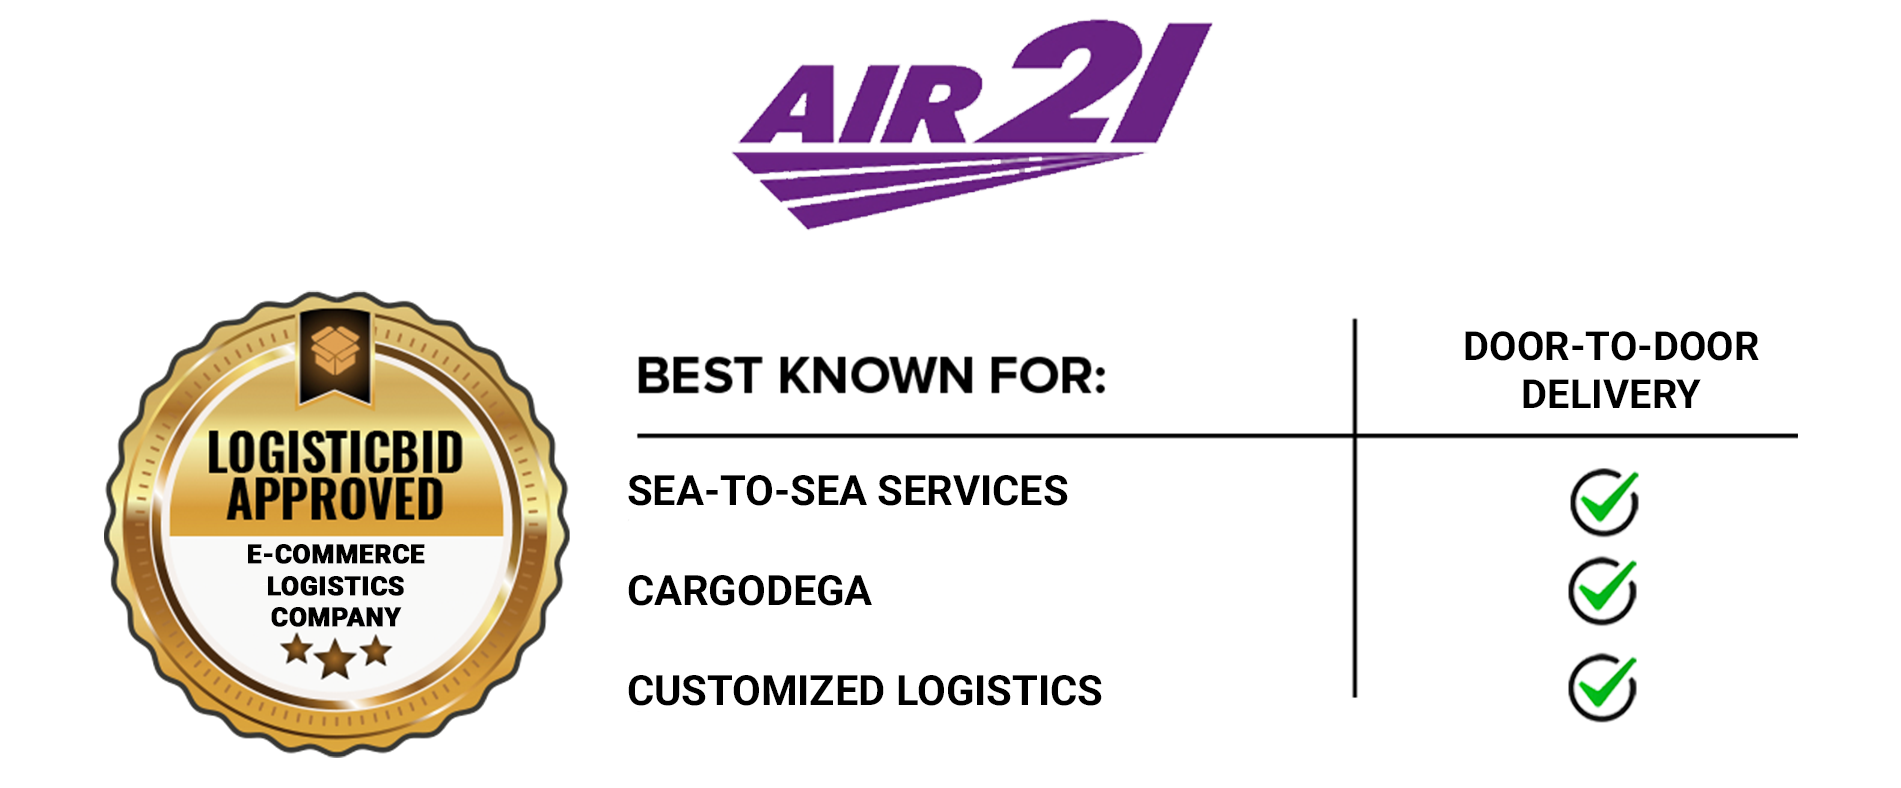 Trucking Services of Leading E-commerce Logistics Company - Air 21